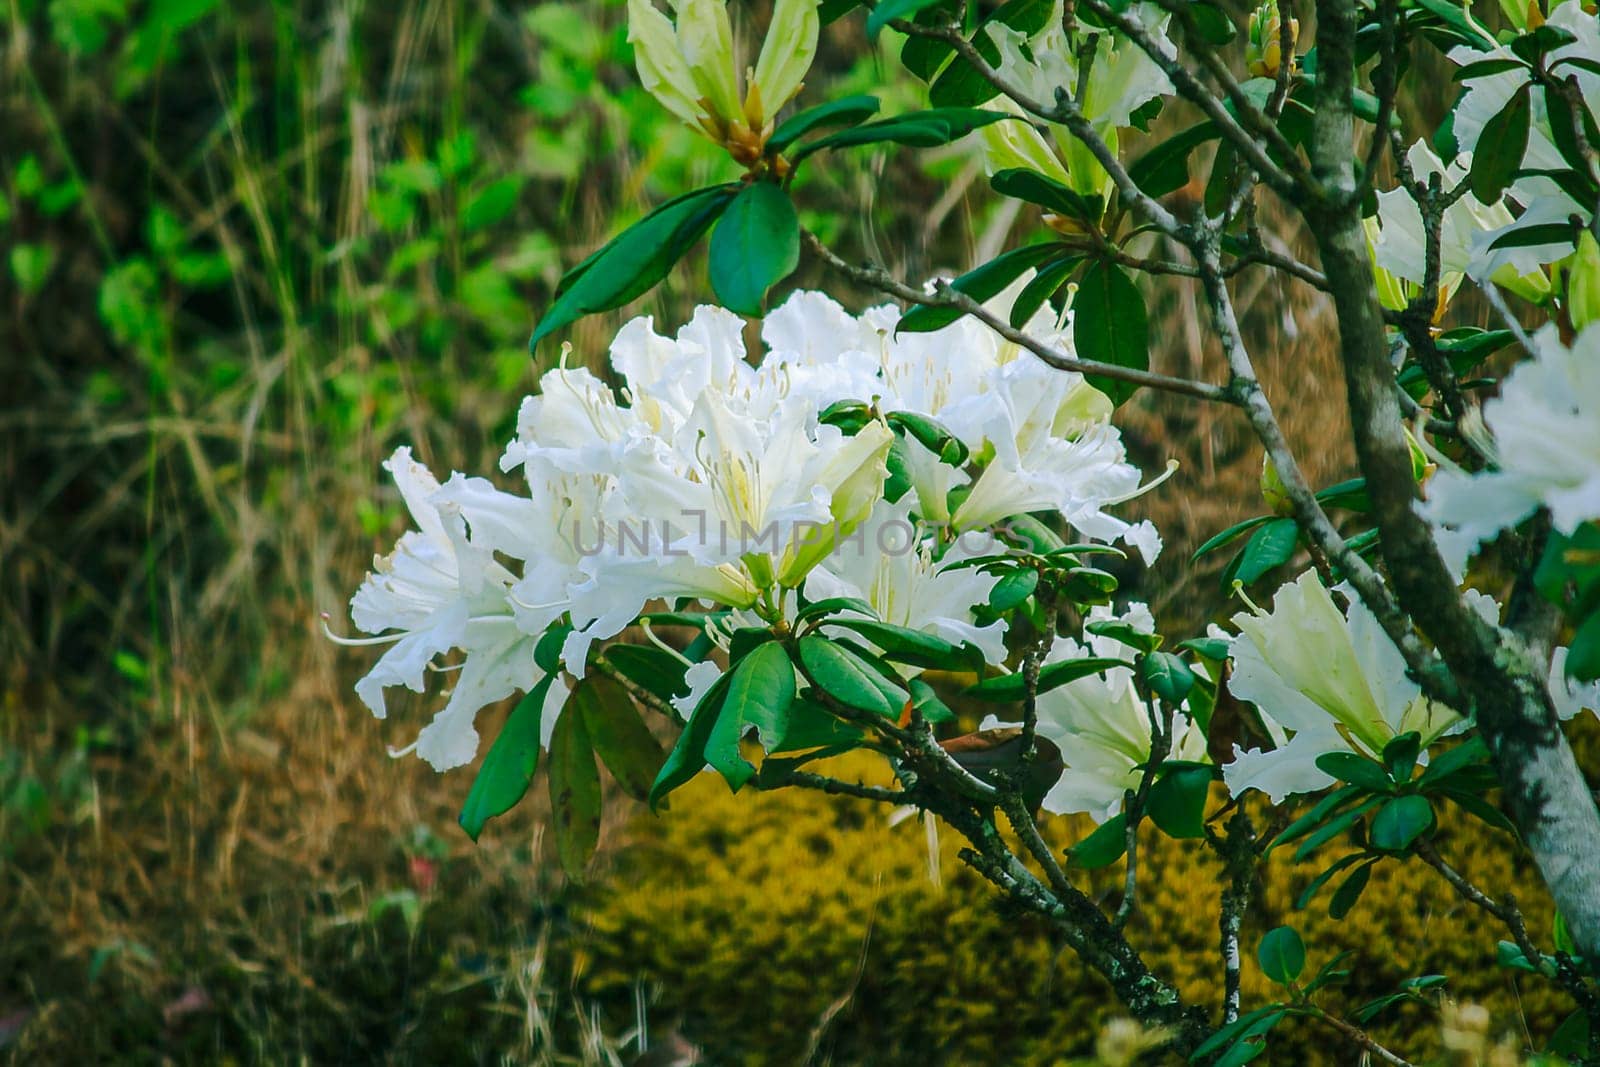 Azalea is the family name of the flowering plant in the genus Rhododendron moulmainense in Doi Inthanon National Park.